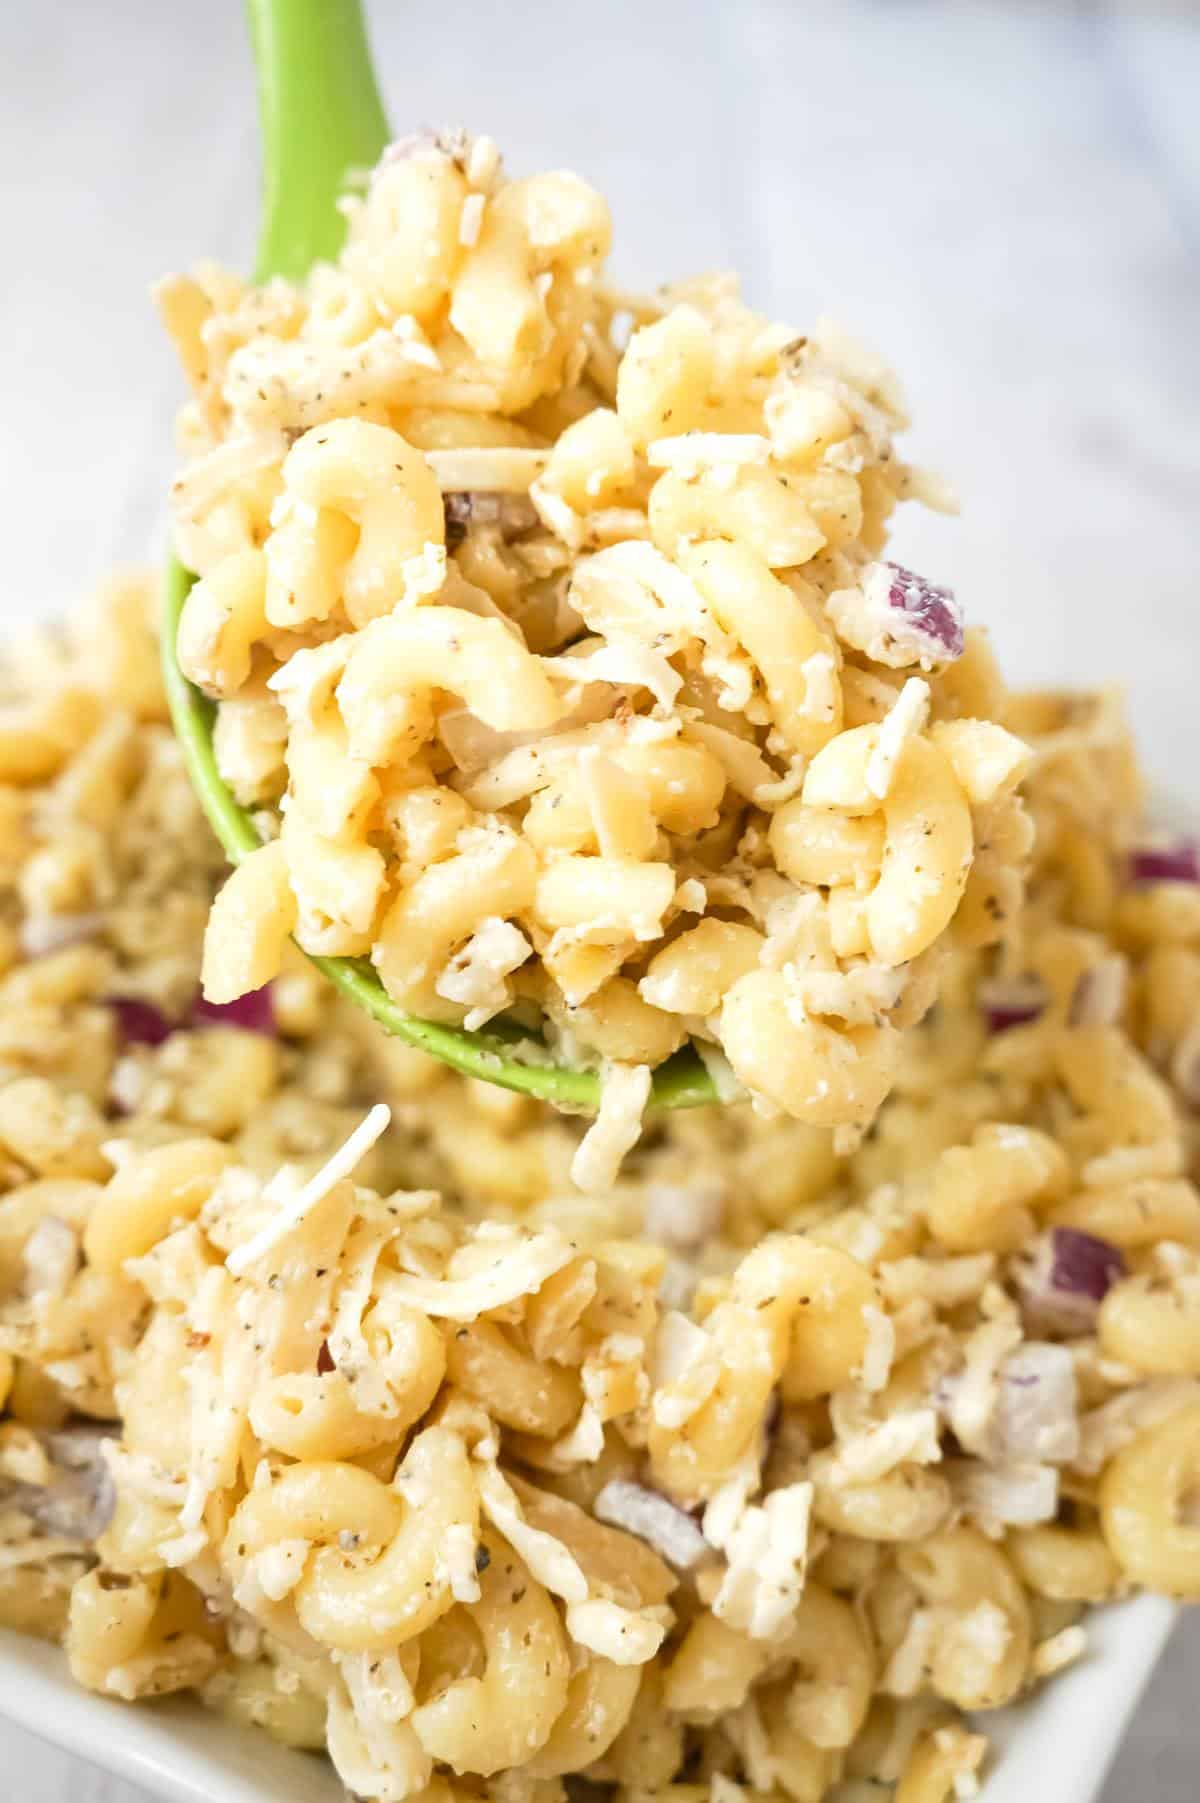 Basil Pesto Pasta Salad is an easy cold side dish recipe loaded with diced red onions, slivered almonds, mozzarella cheese and Parmesan cheese all tossed in mayo and basil pesto.